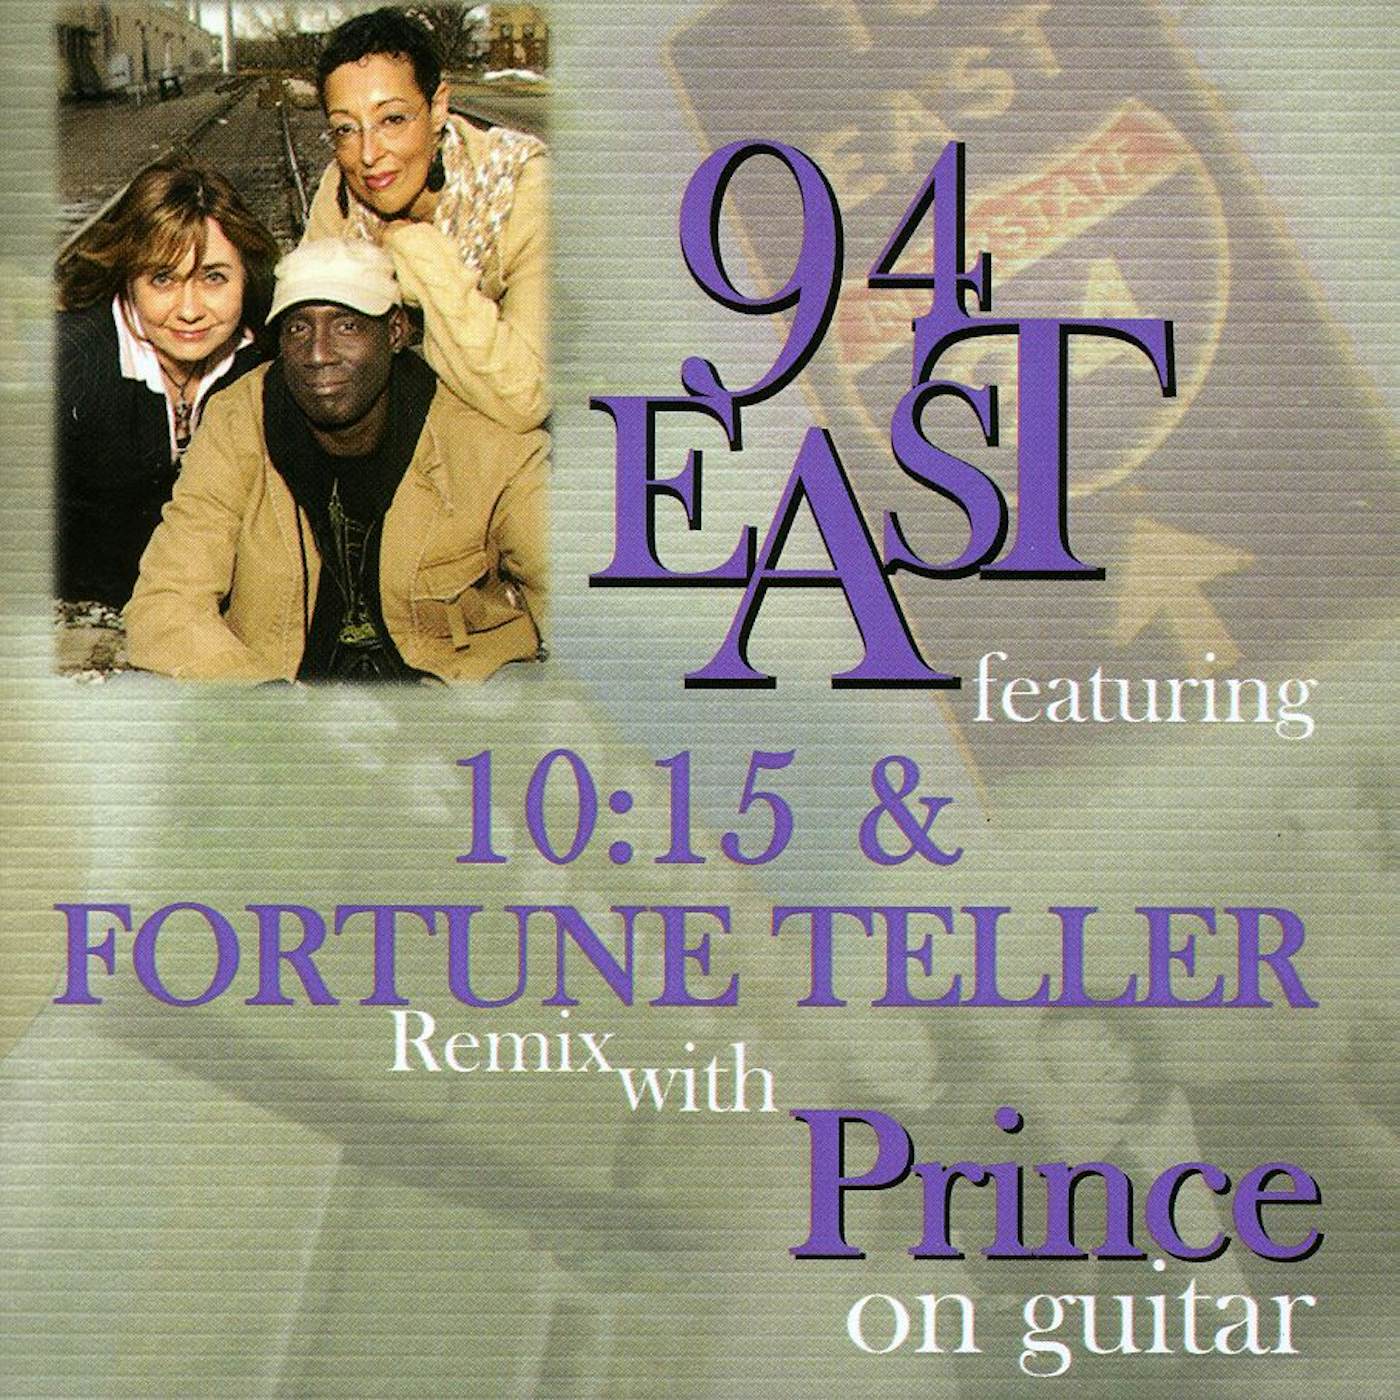 94 EAST FEATURING 10:15 & FORTUNE TELLER REMIX WIT CD